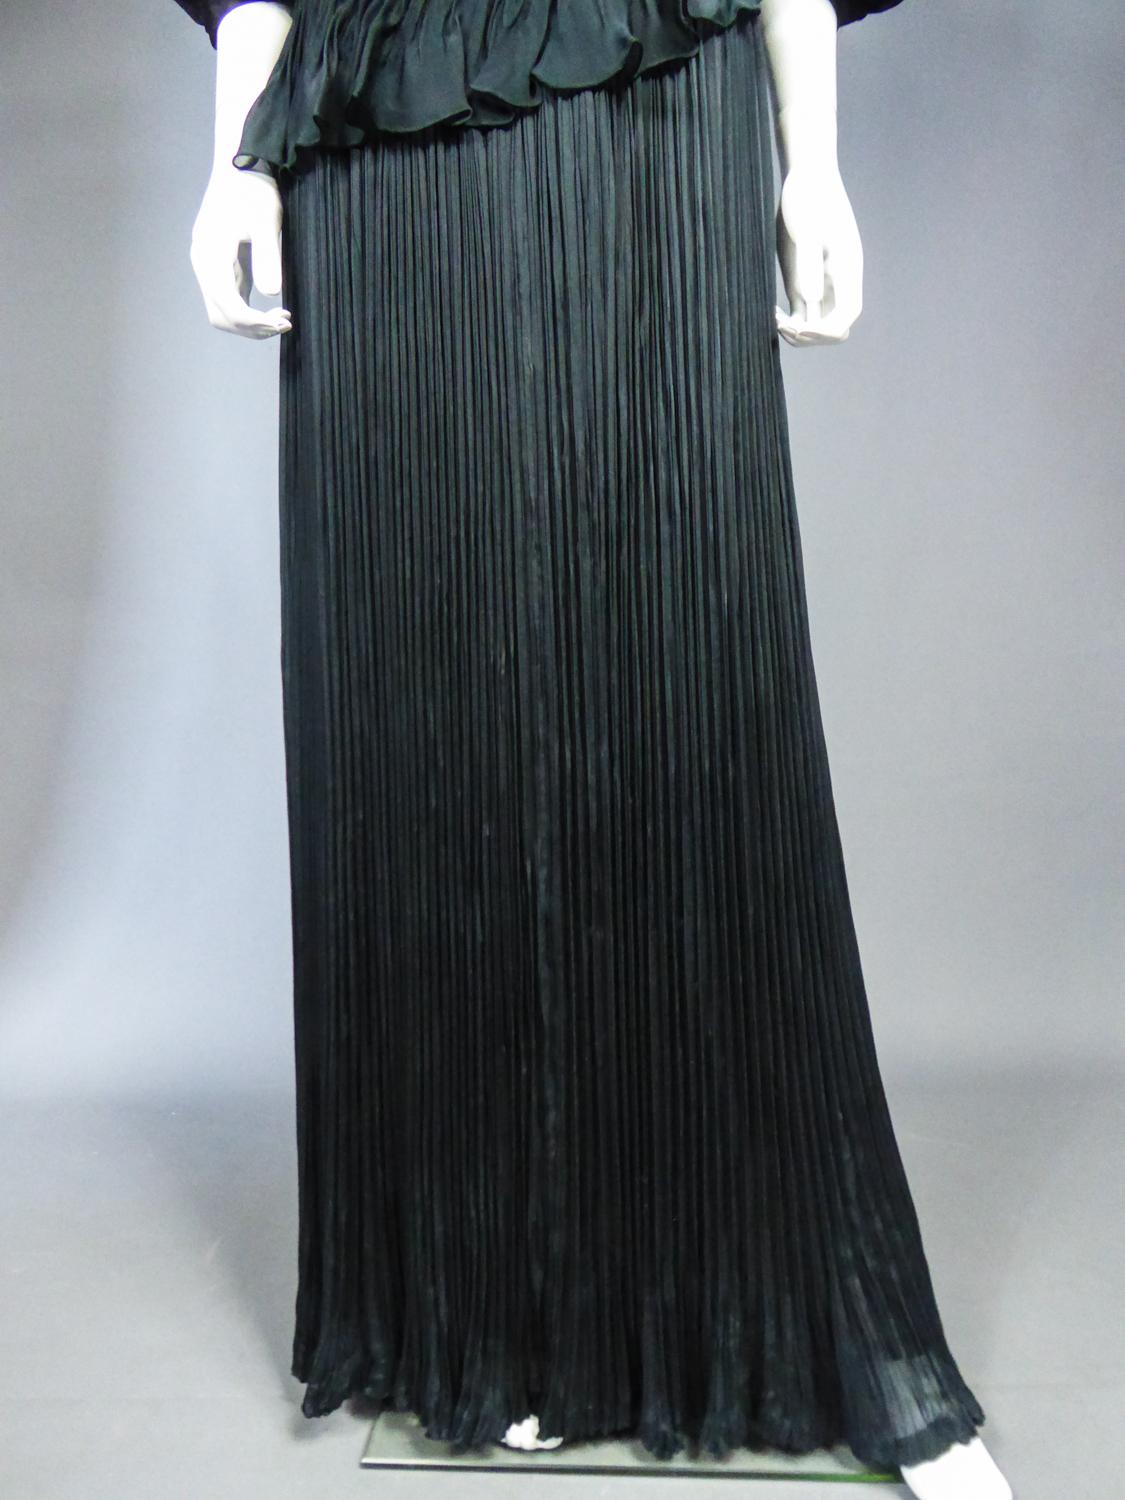 An Emanuel Ungaro French Evening Dress Numbered 295-5-85 Circa 1985/1990 For Sale 4